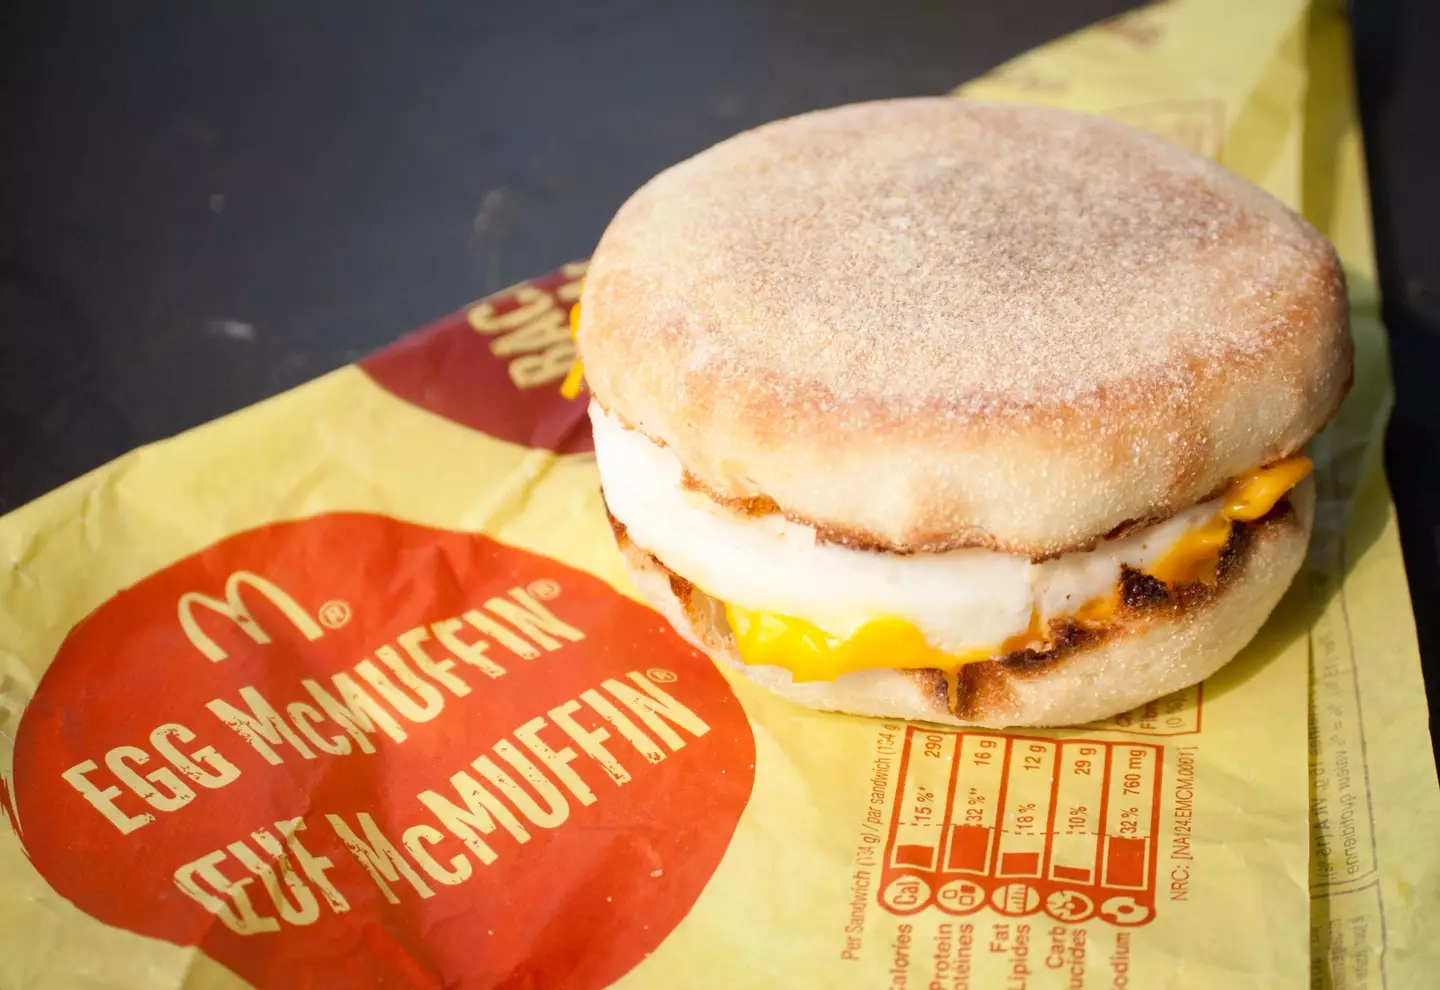 You can snap up a free McMuffin.